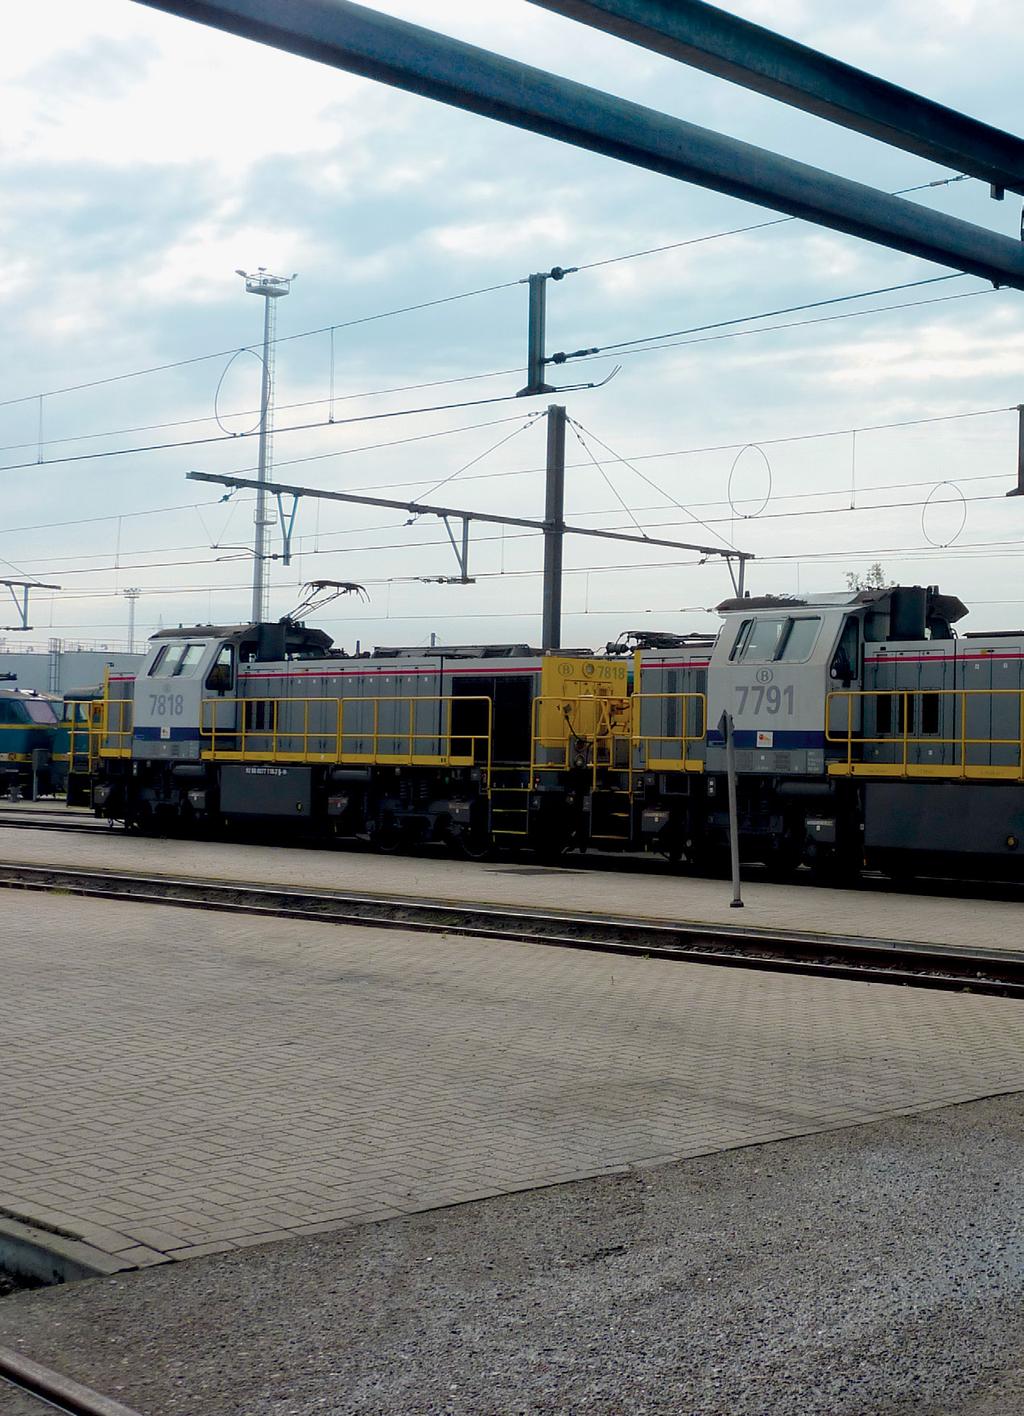 Experience of a client SNCB/NMBS, the Belgian national railway company, has more than 170 DZC engines in the class 77 and Class 78 locomotives, they do not hesitate to recommend the ABC engine as a